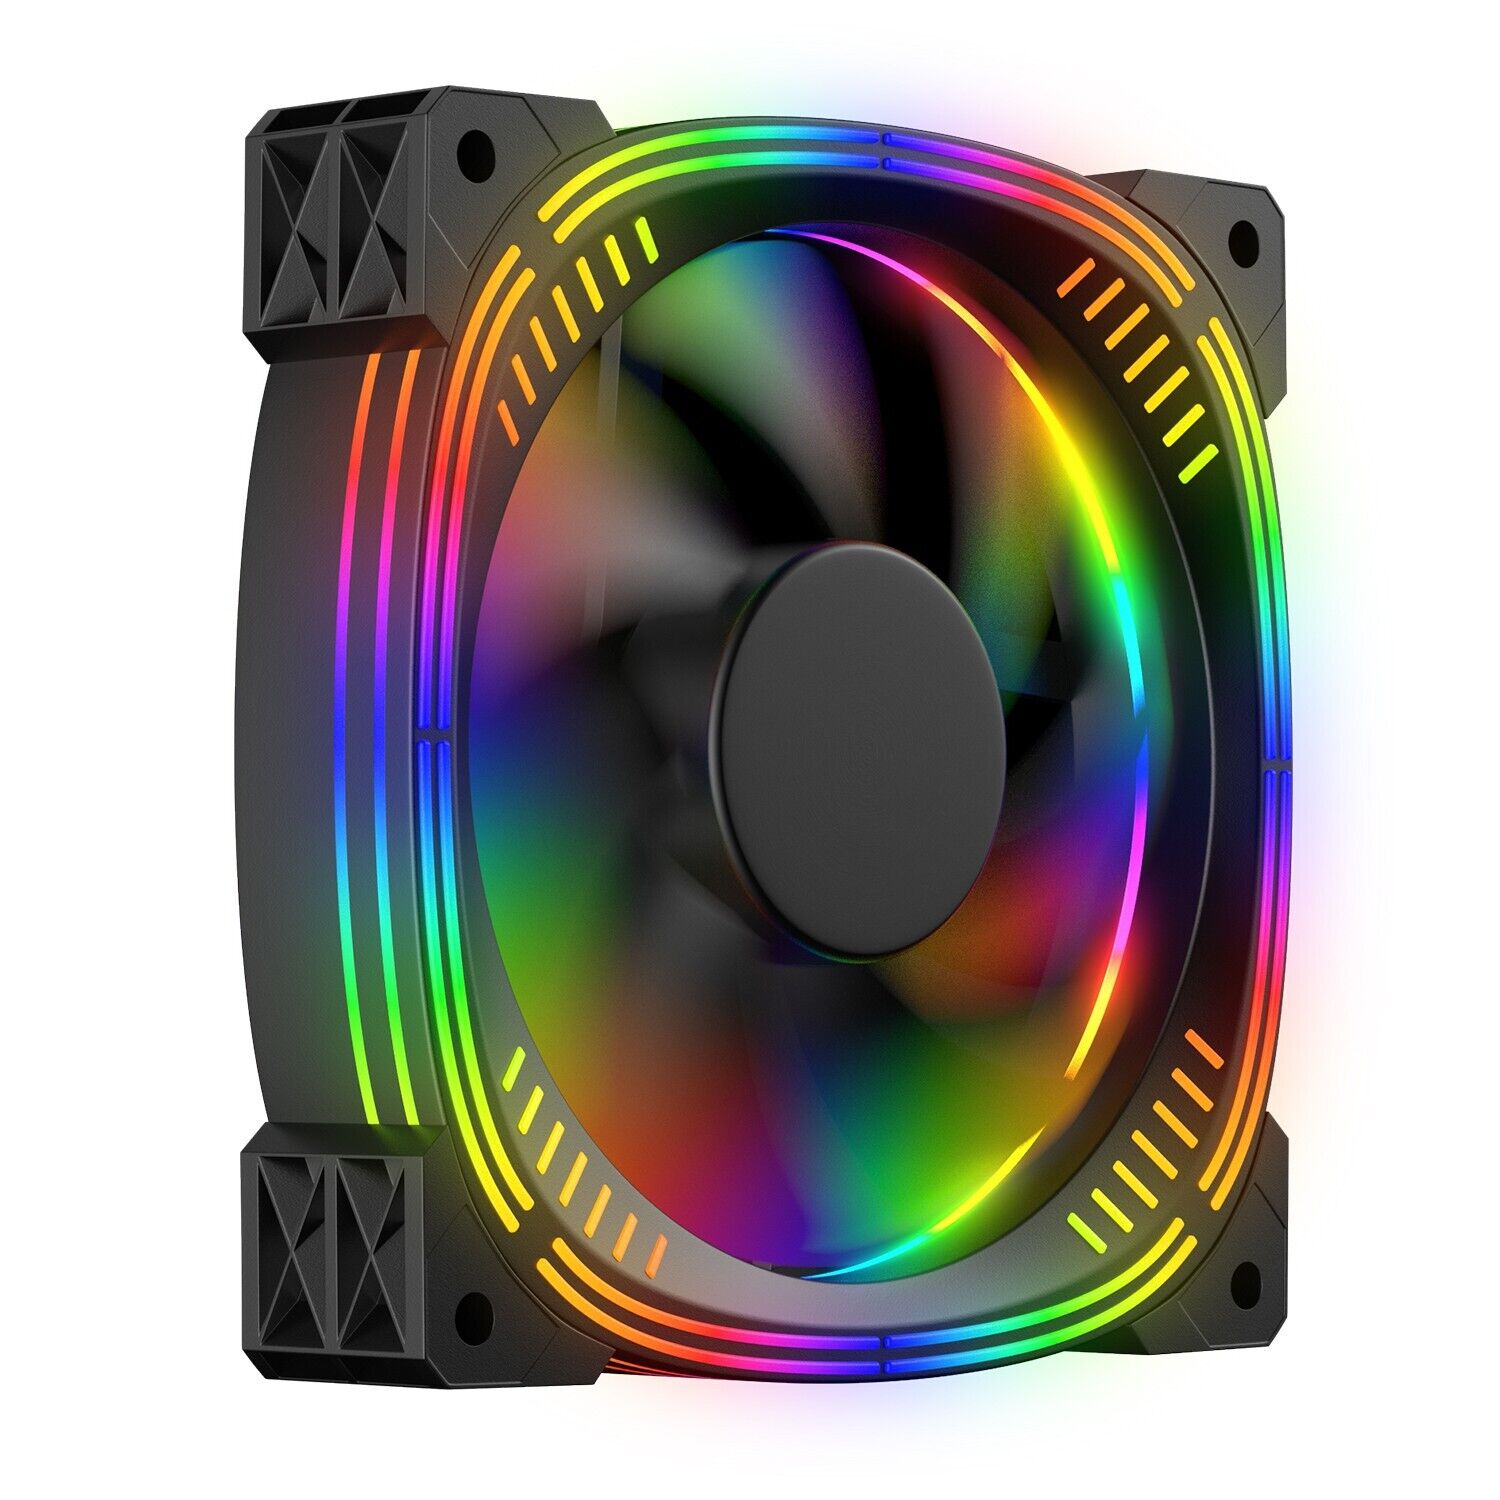 4-pin Dustproof & Leakproof Universal Colorful & Quiet Computer Case Cooling Fan